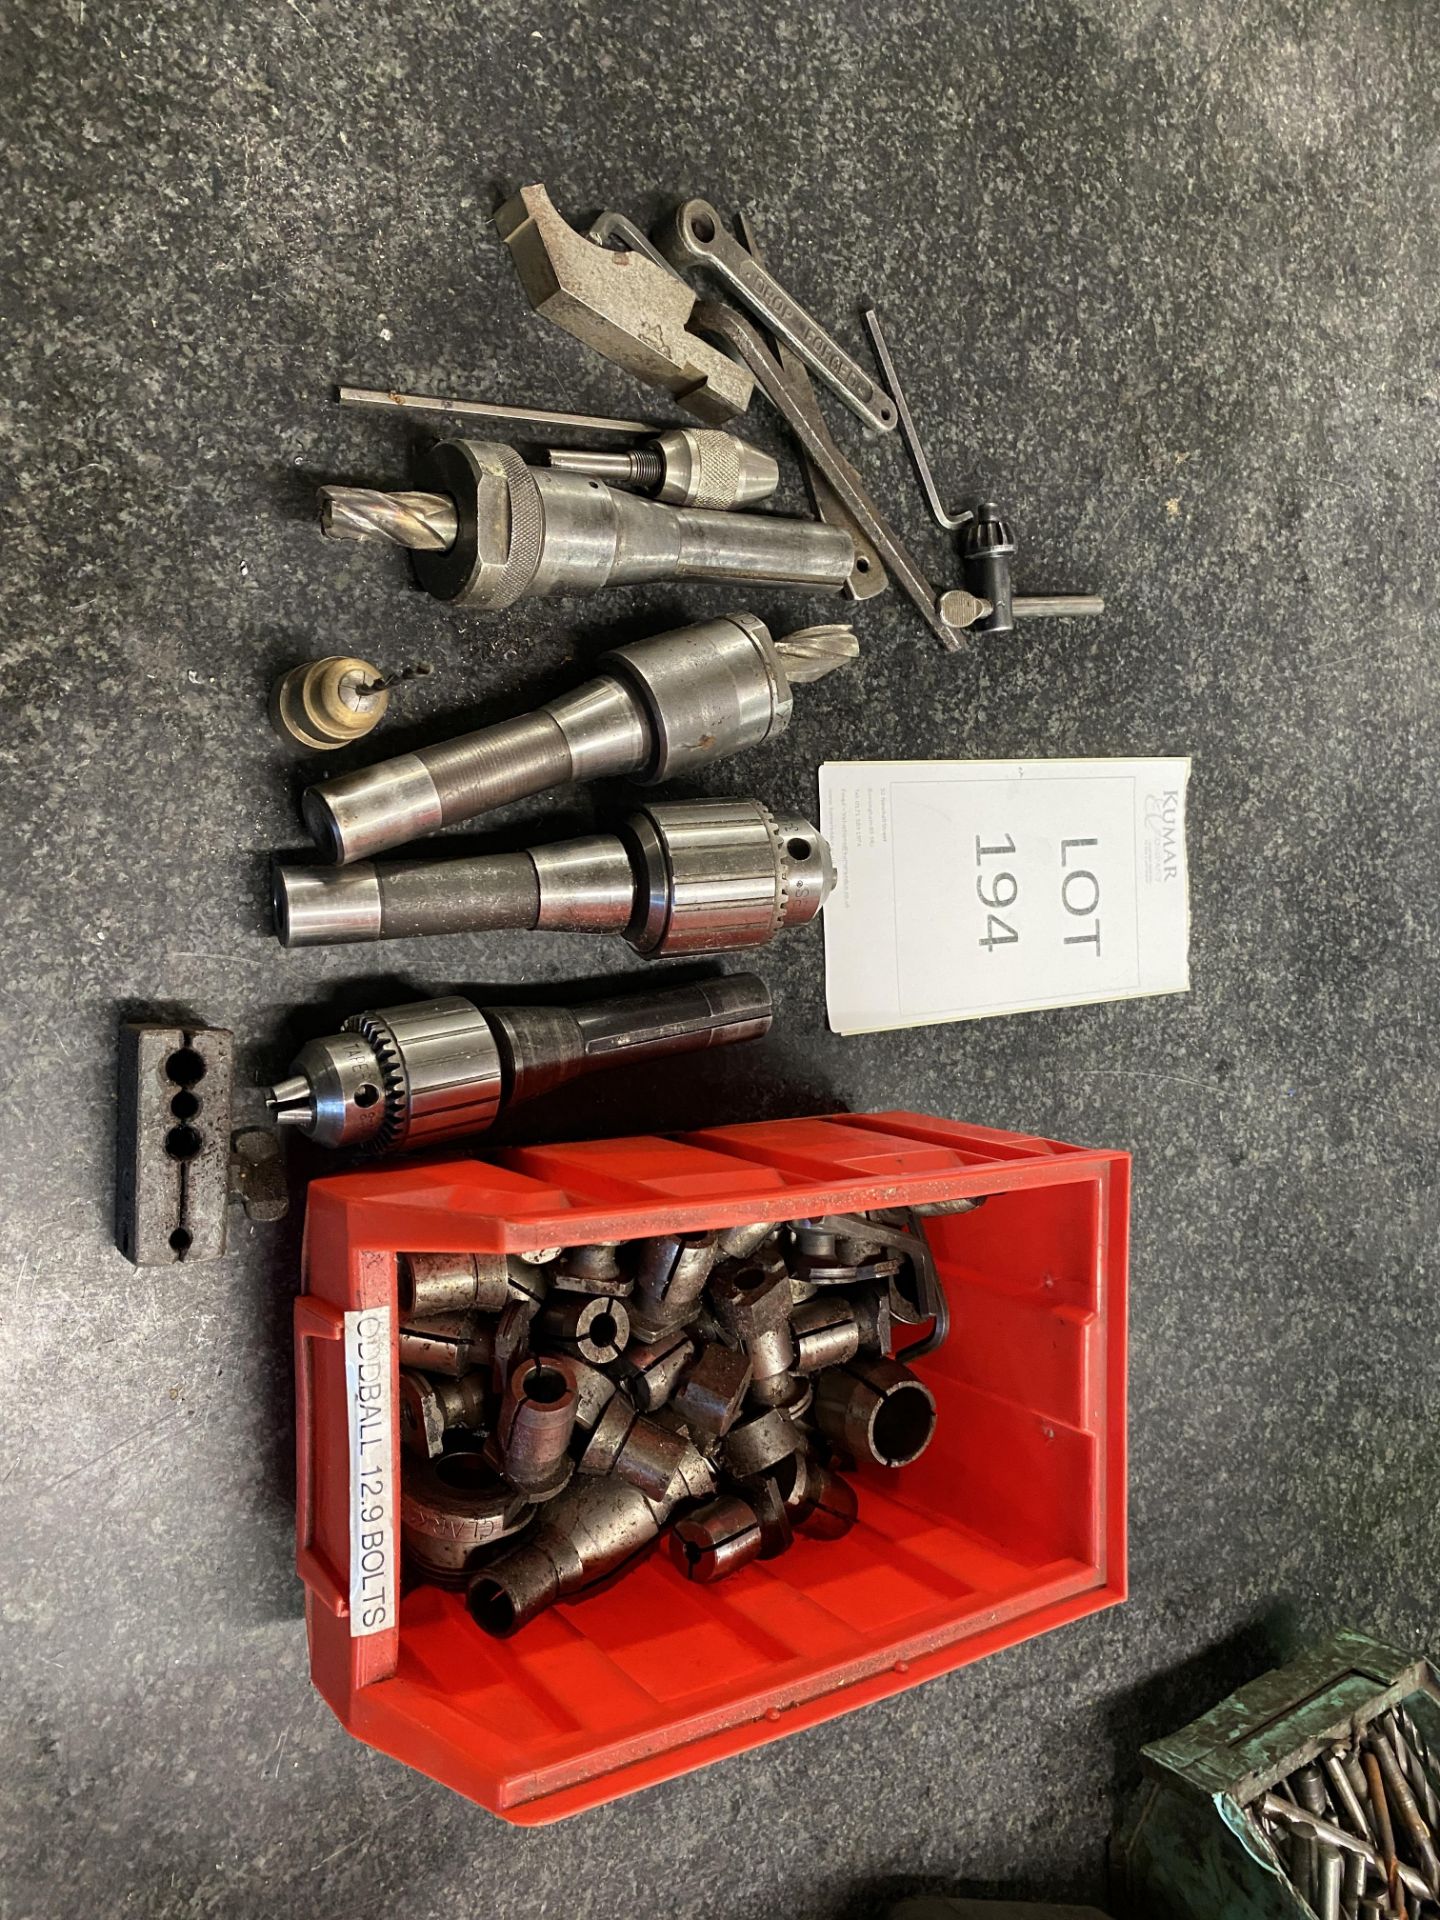 Assorted Drill Bits & Colletts as shown